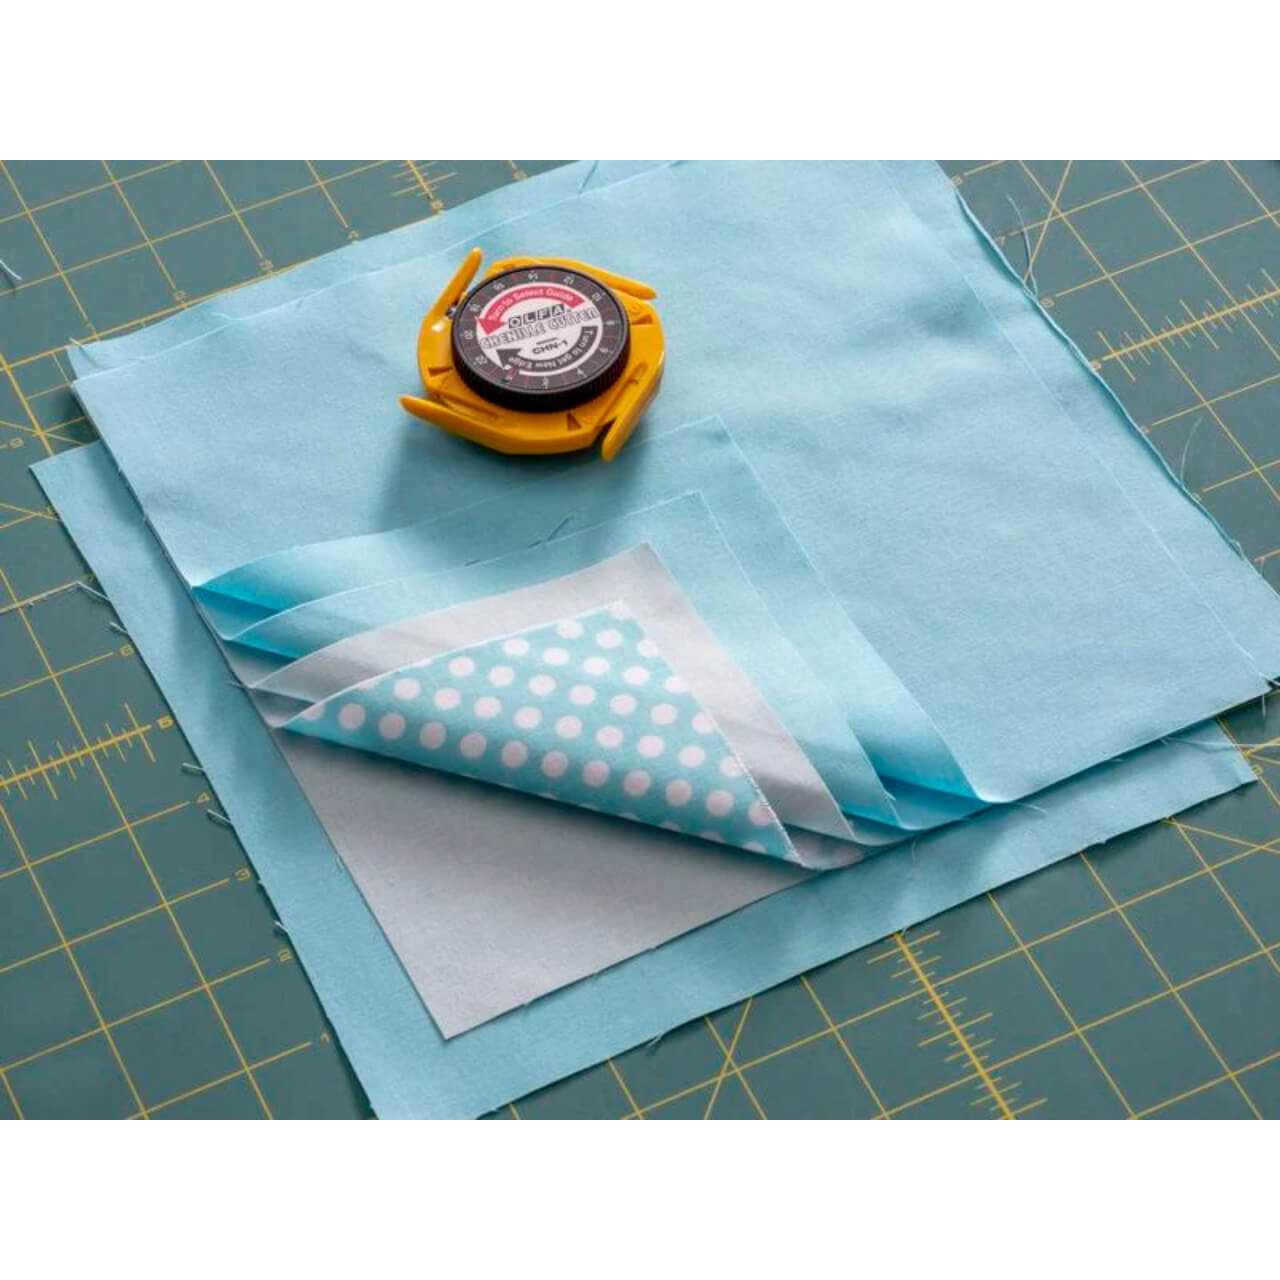 OLFA CHN-1 Chenille Cutter placed on a layered fabric of blue hues, ready for textile crafting on a cutting mat with grid lines.